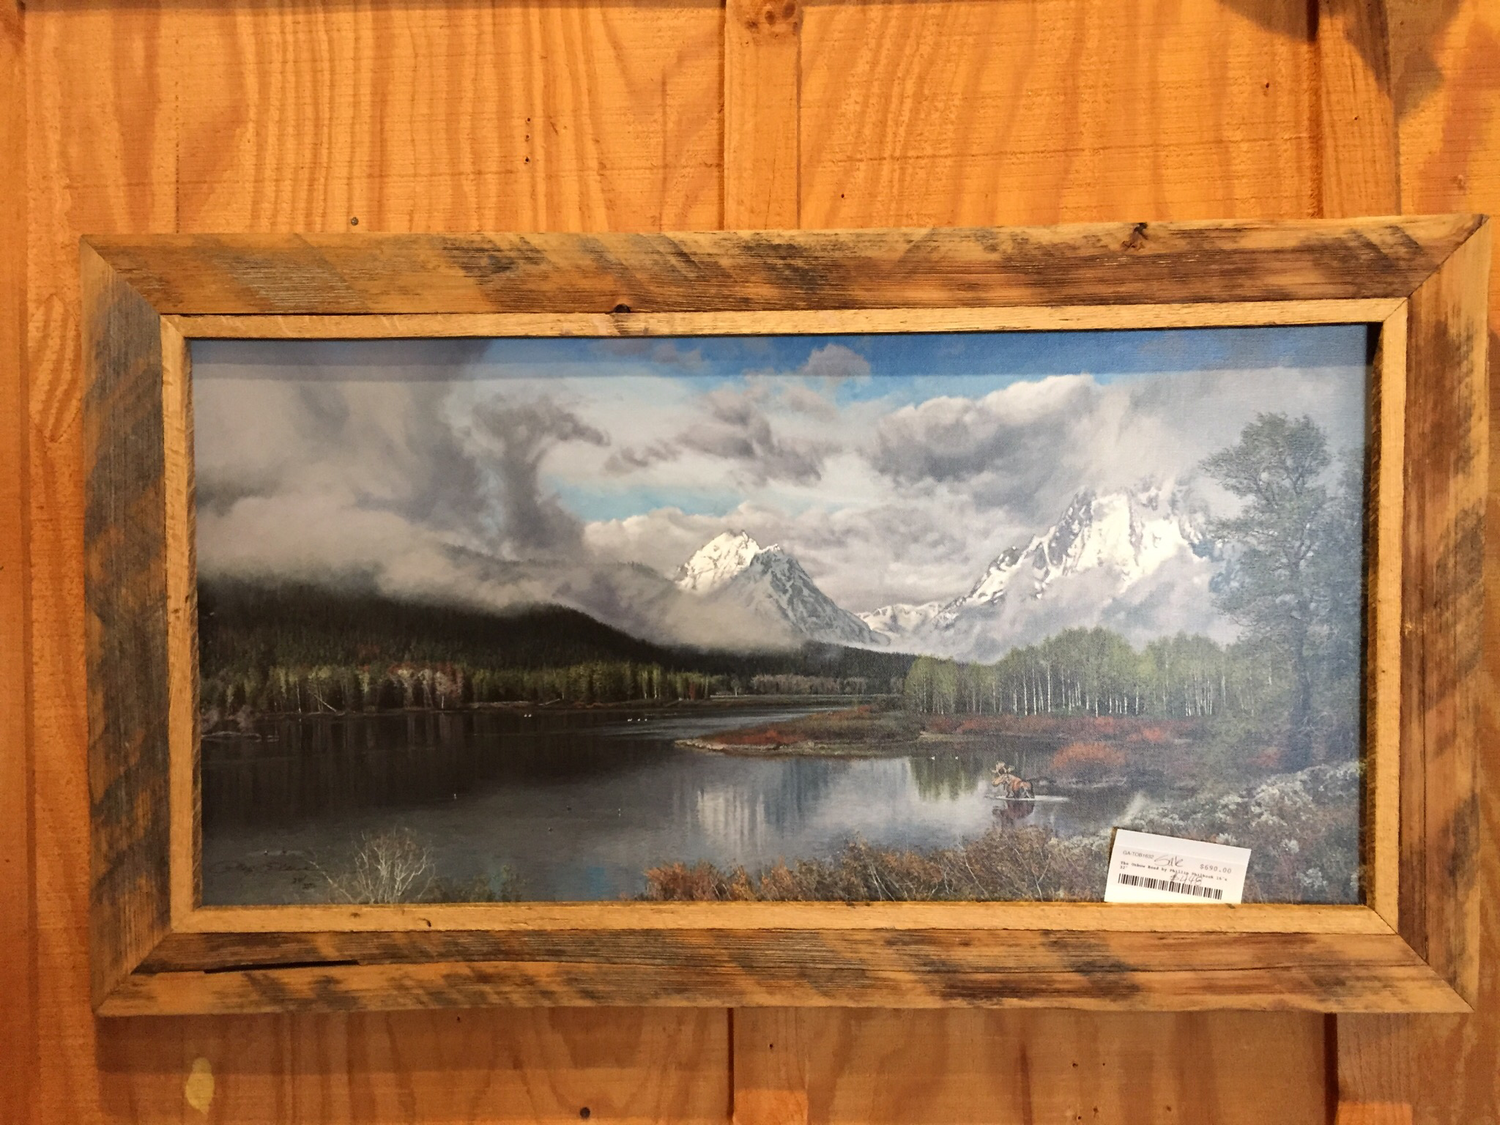 The Oxbow Bend by Phillip Philback